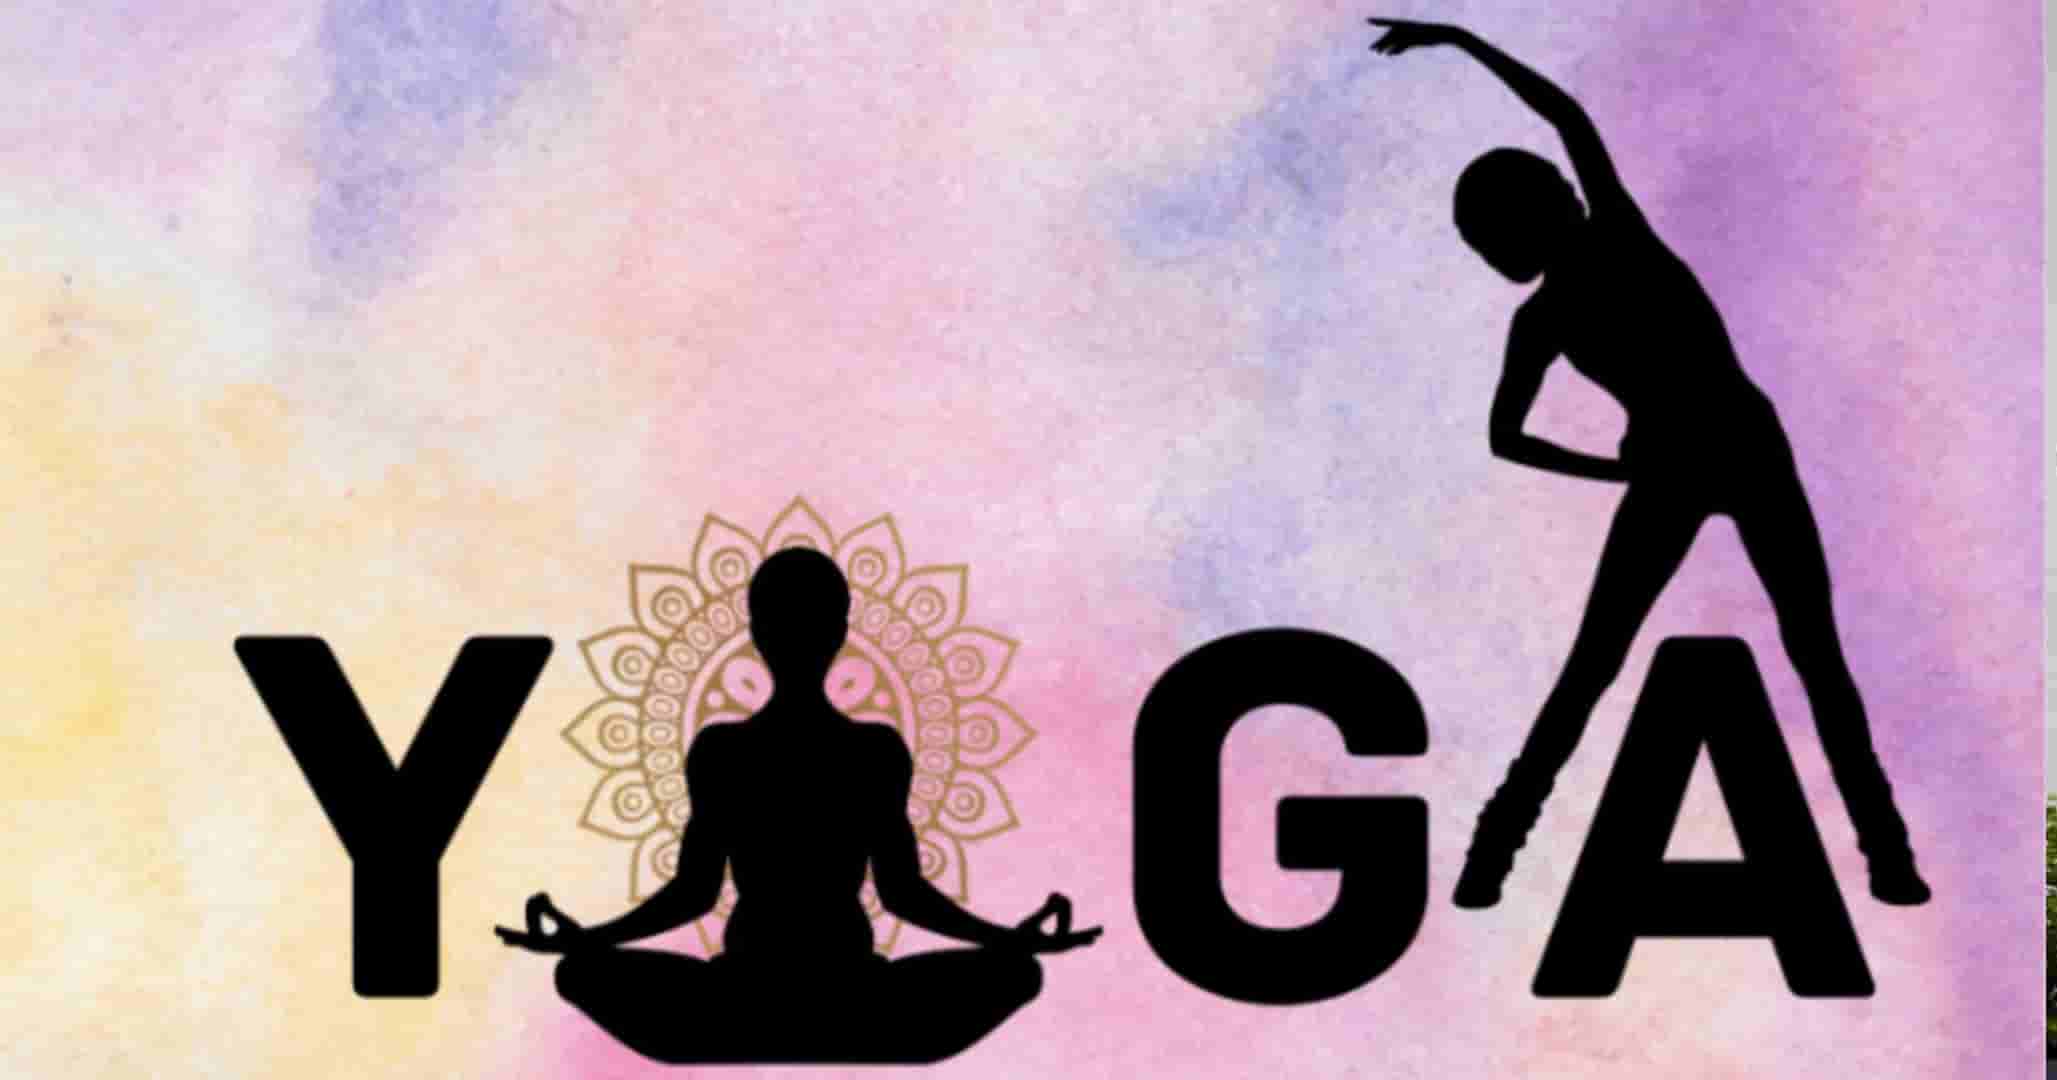 "what is meaning of sanskrit word ""yoga"